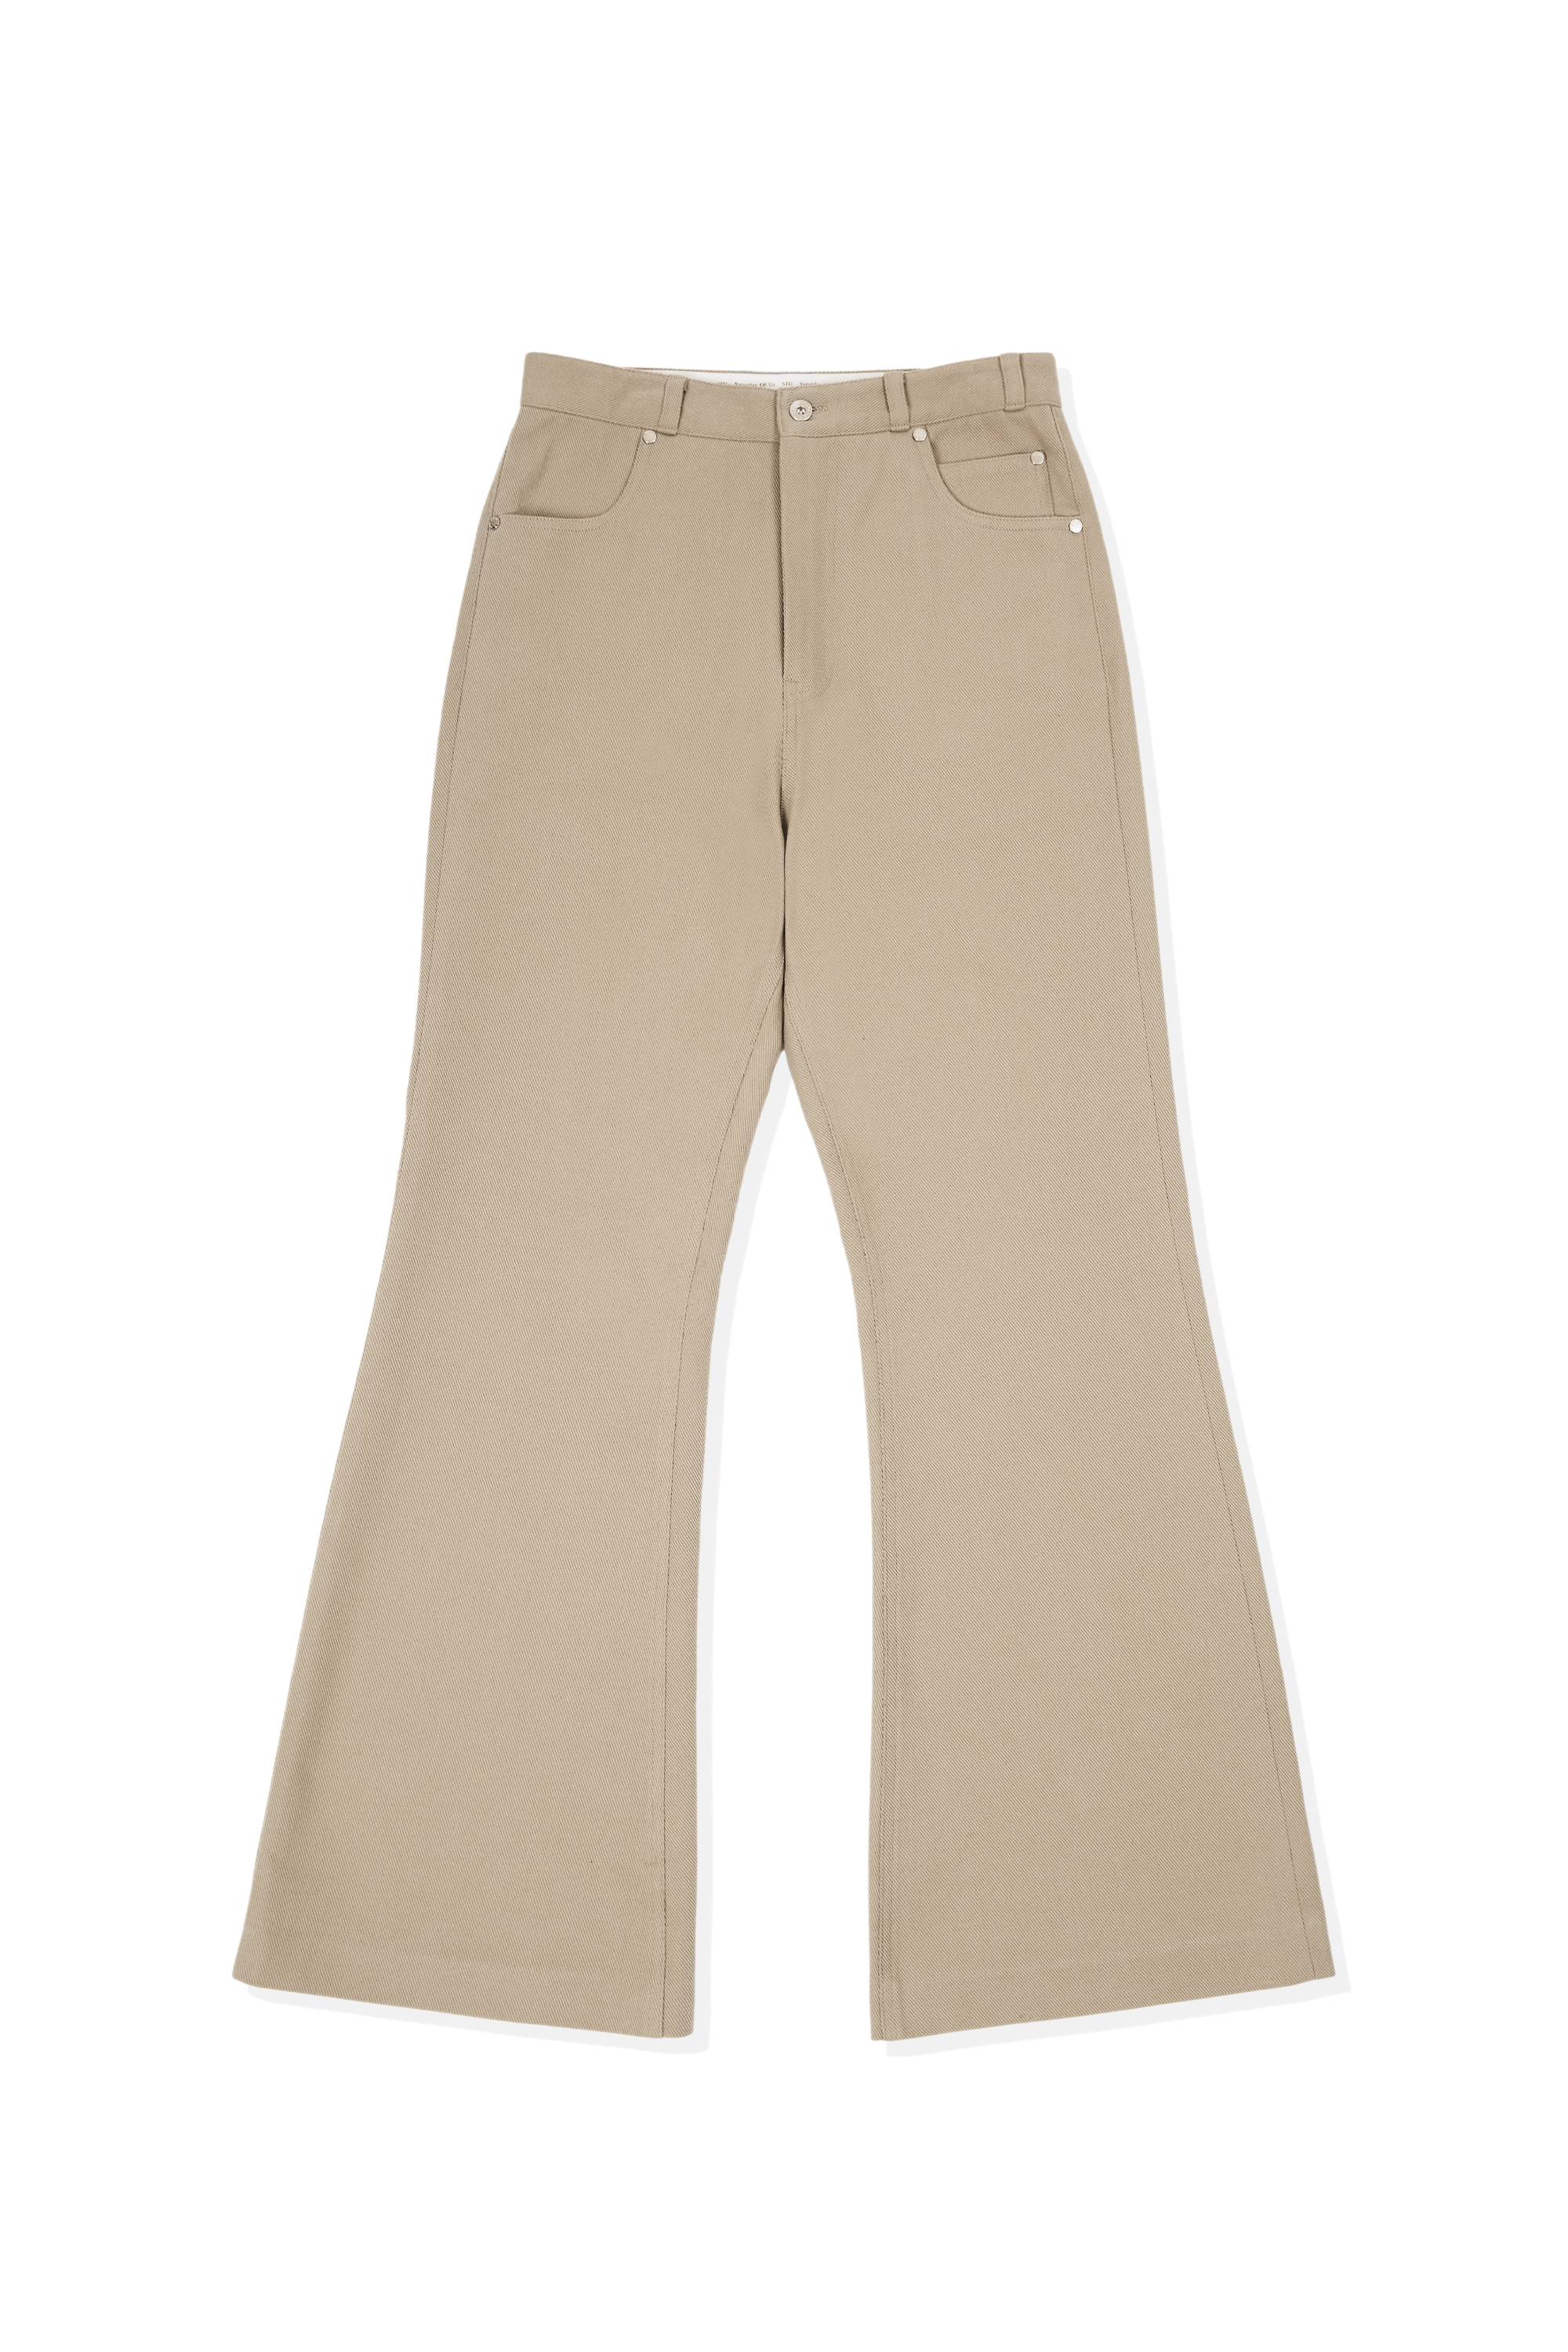 24 Spring Flared Cotton Pants Beige